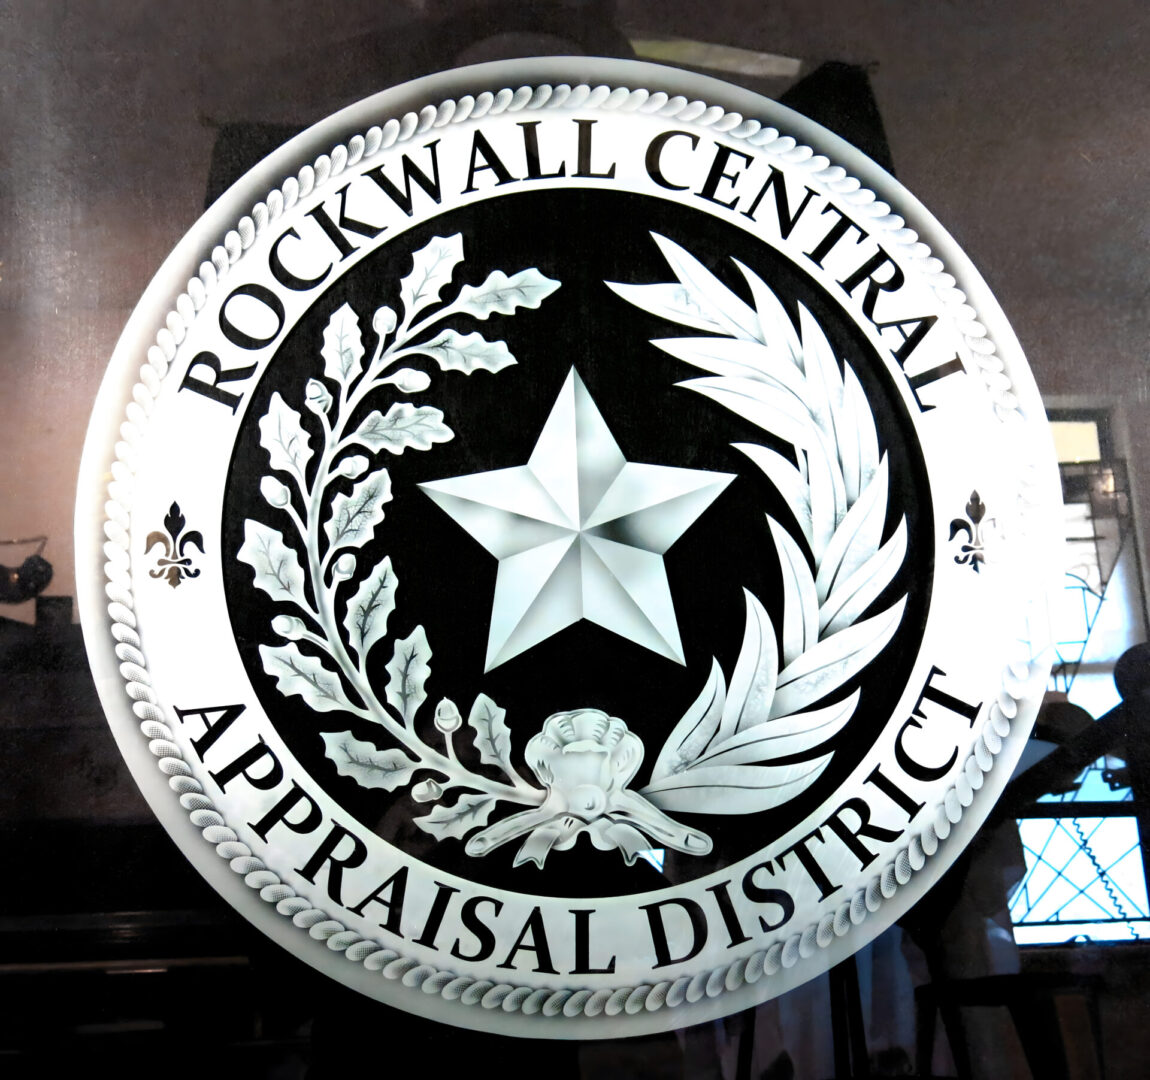 Seal of the rockwall central appraisal district displayed on a circular plaque with a star and decorative motifs.